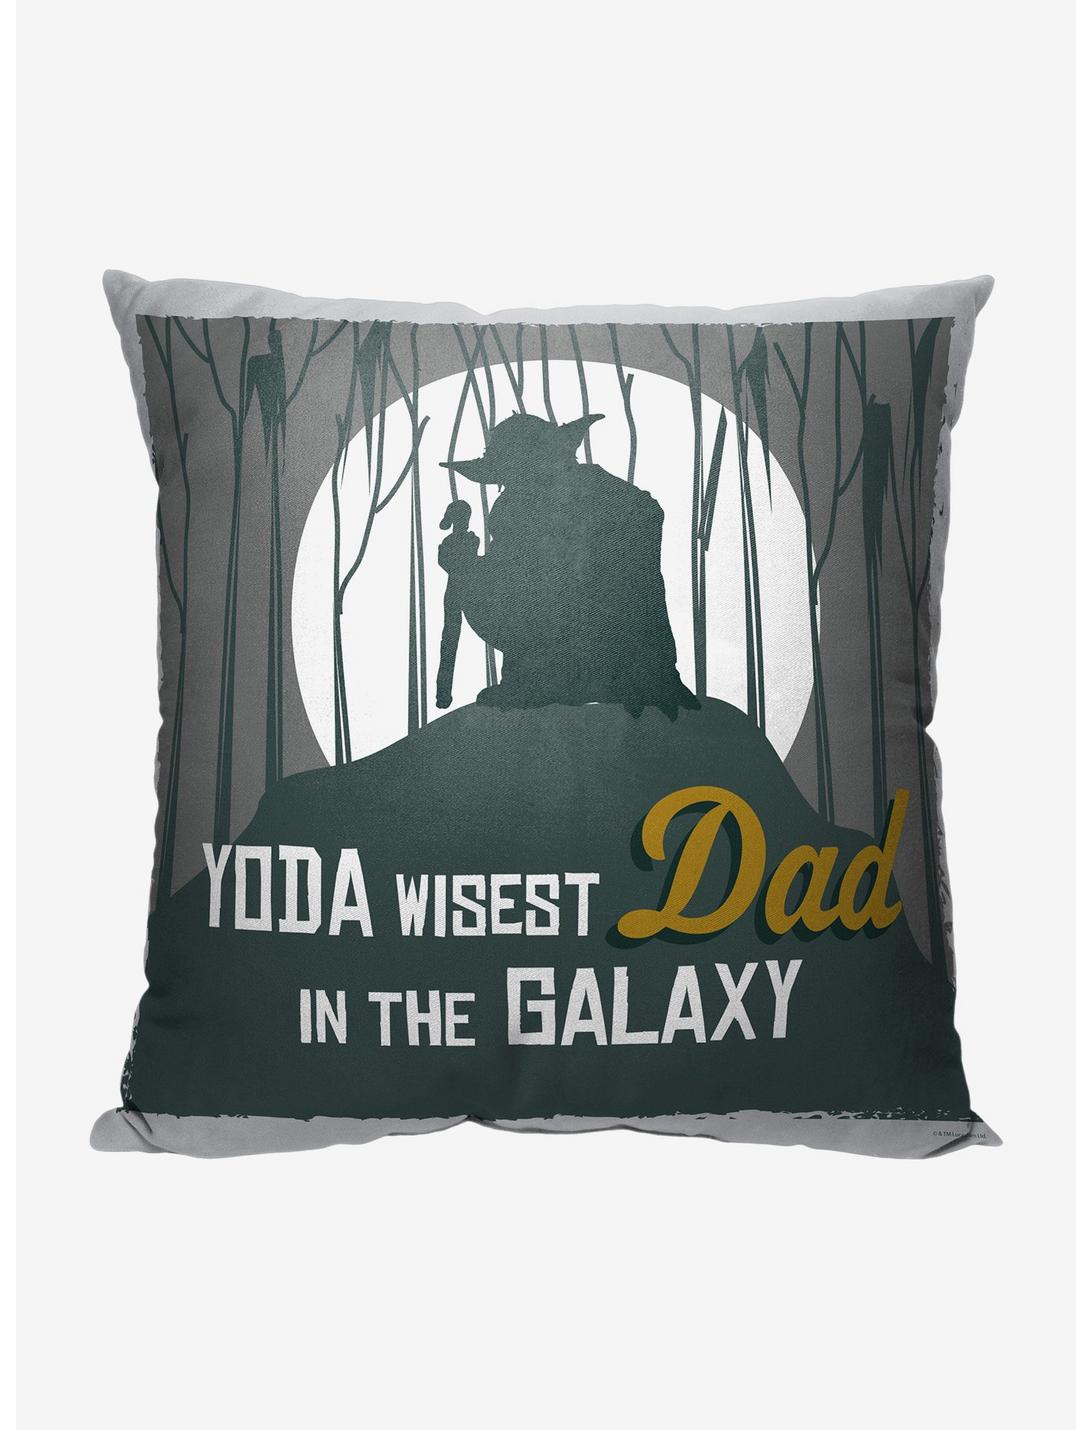 Star Wars Classic Yoda Best Dad Printed Throw Pillow, , hi-res